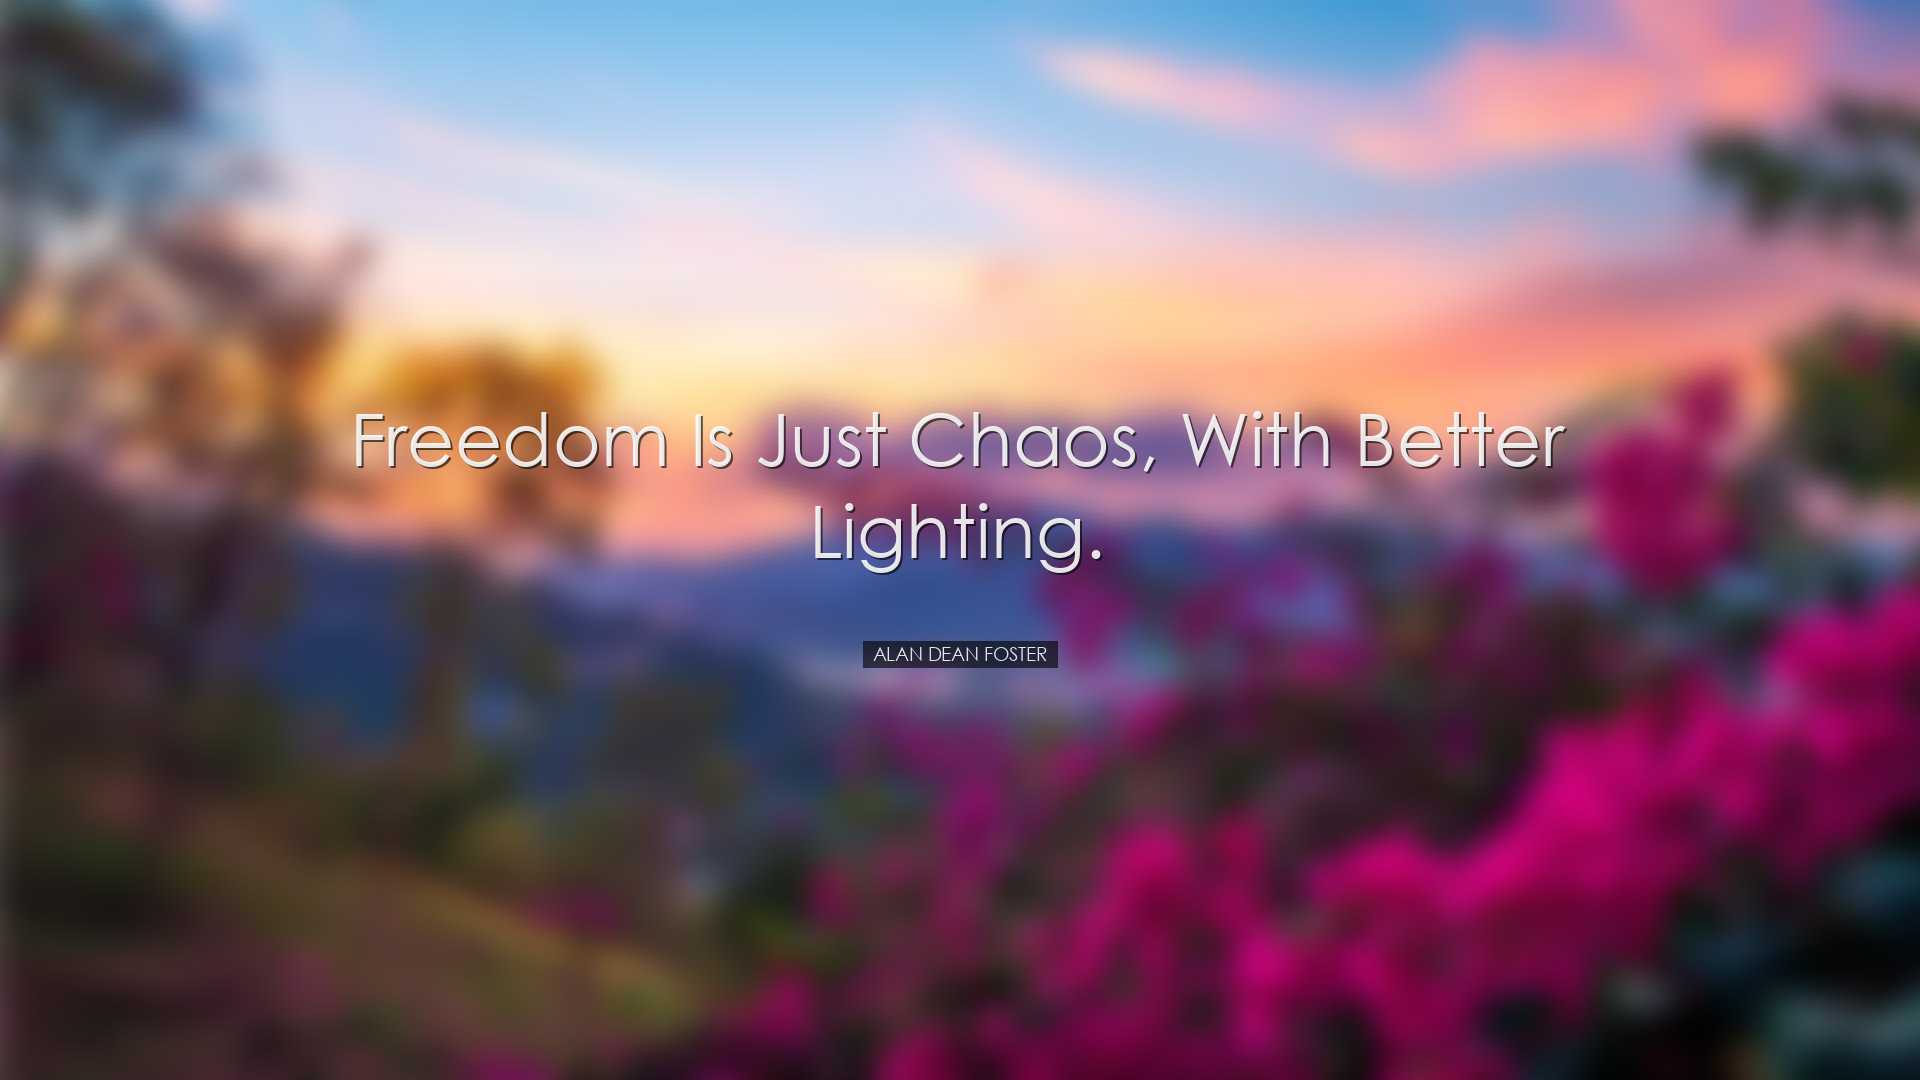 Freedom is just Chaos, with better lighting. - Alan Dean Foster